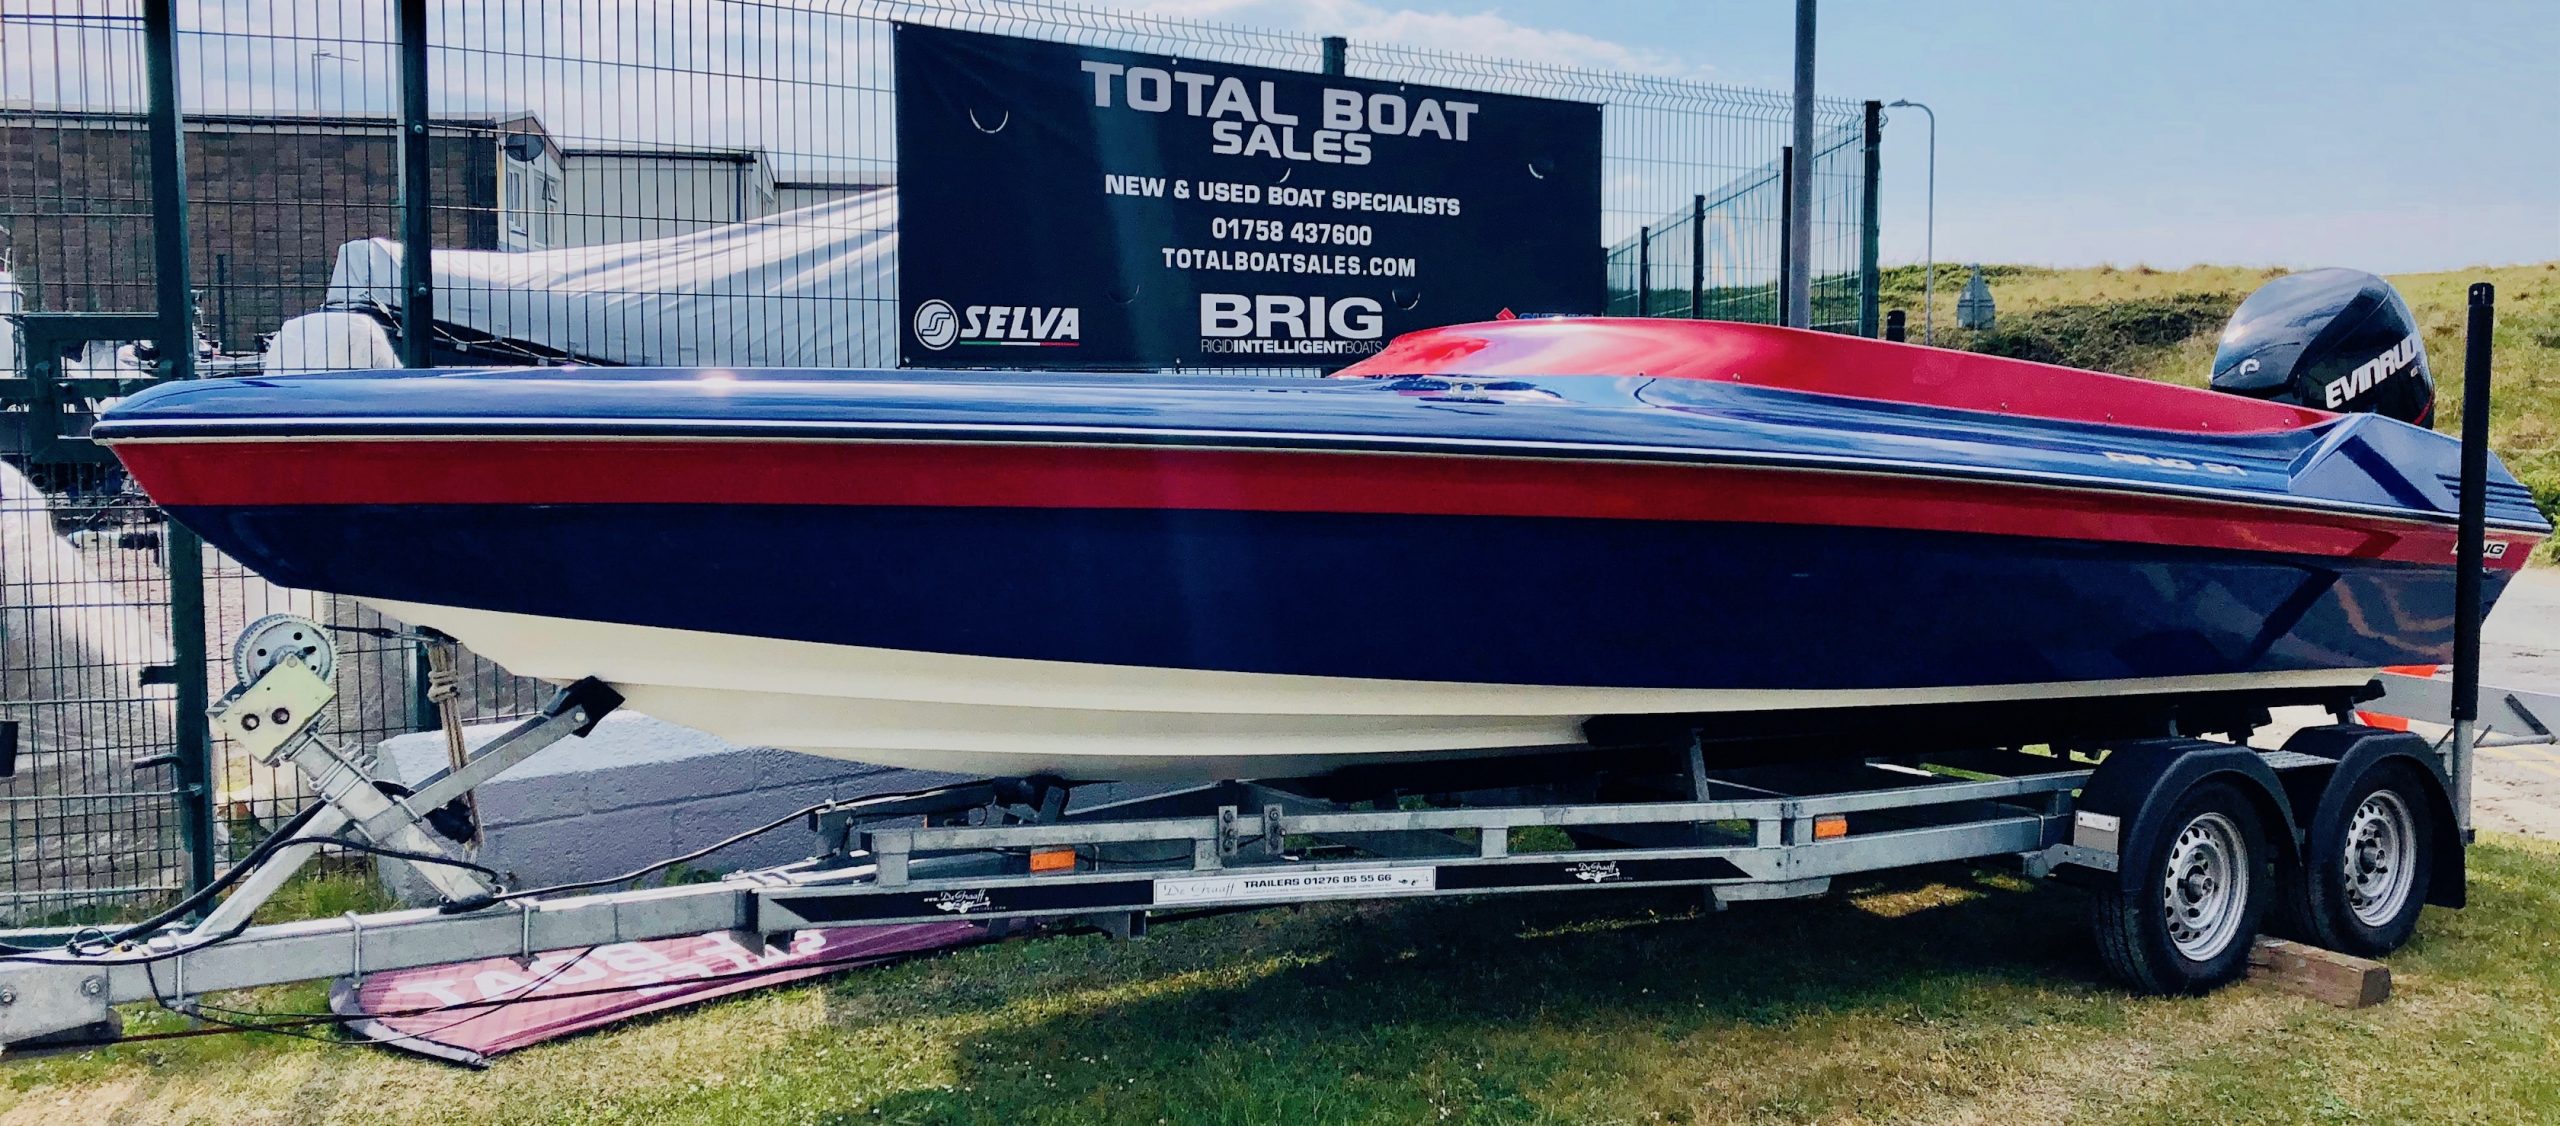 RING 21c Powerboat + Evinrude 225hp E-TEC For Sale